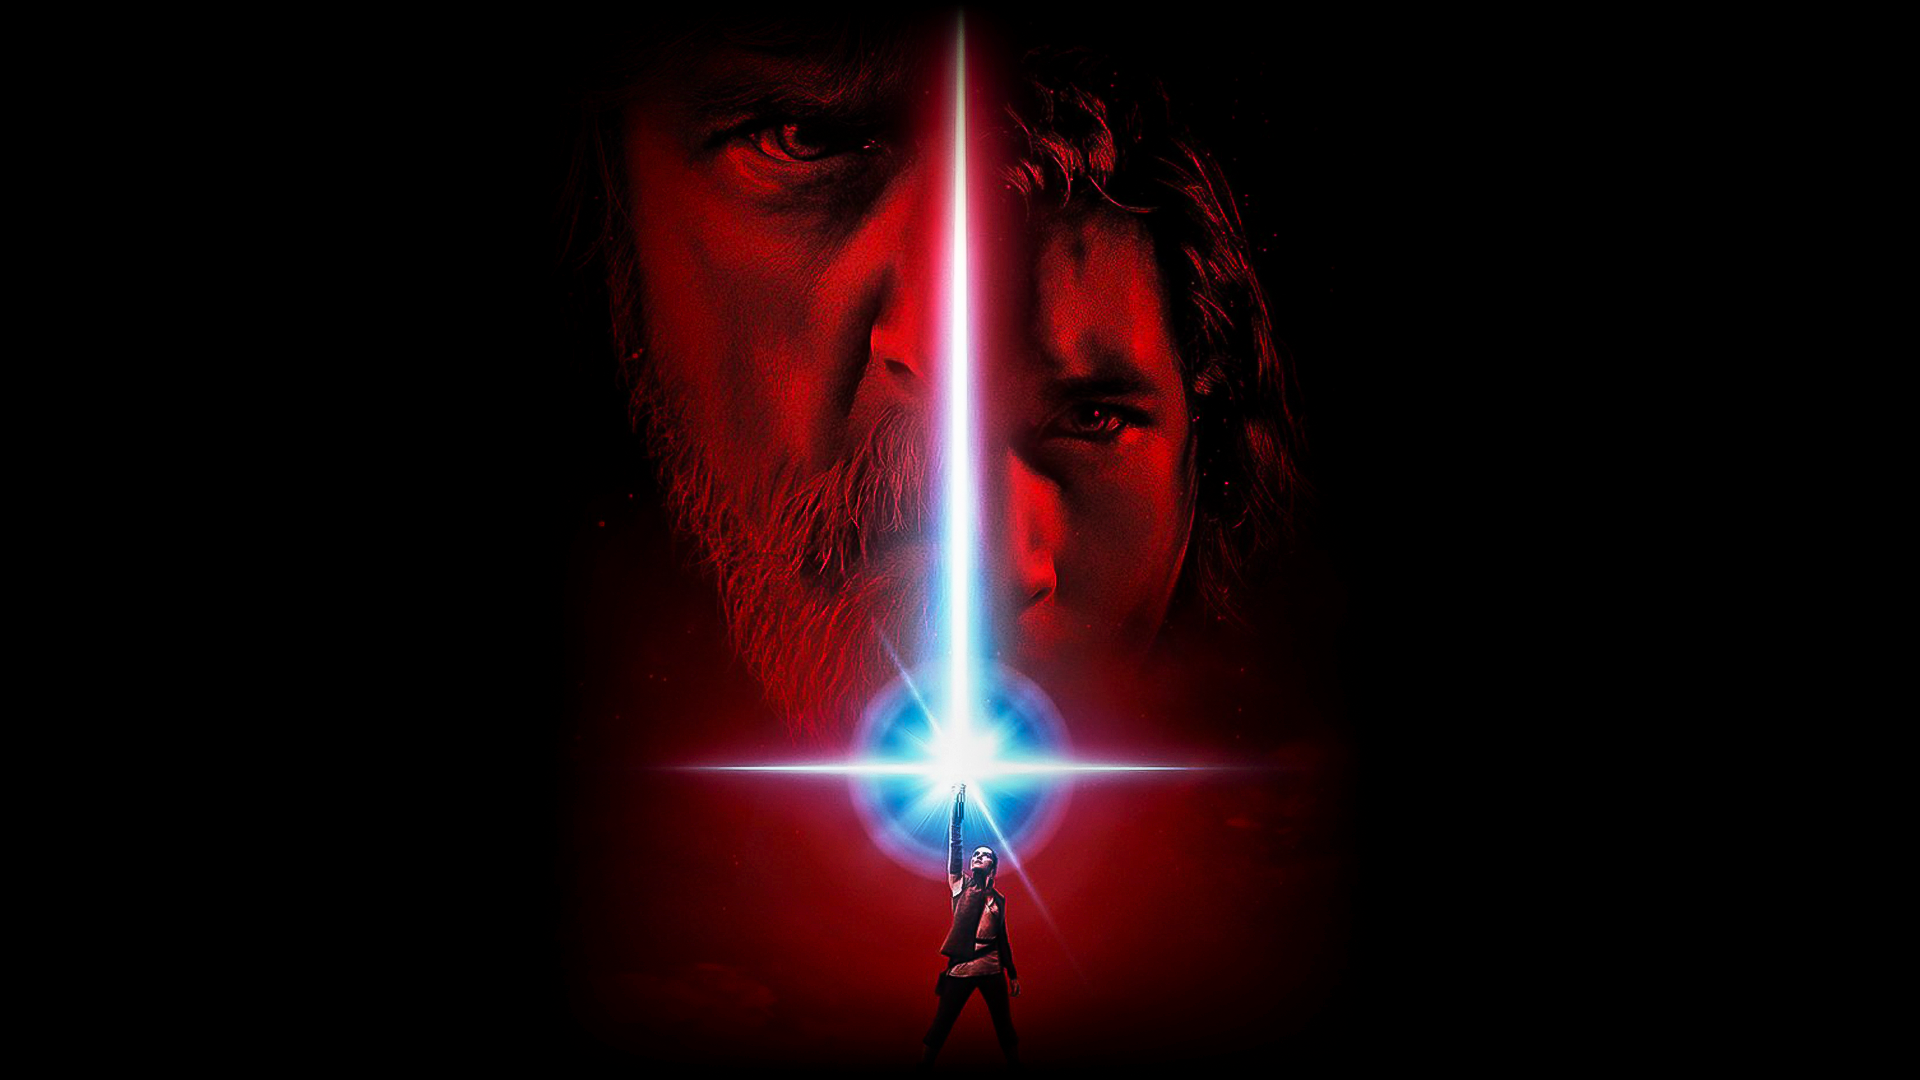 I Made A New Star Wars Background From The Last Jedi Poster Pics